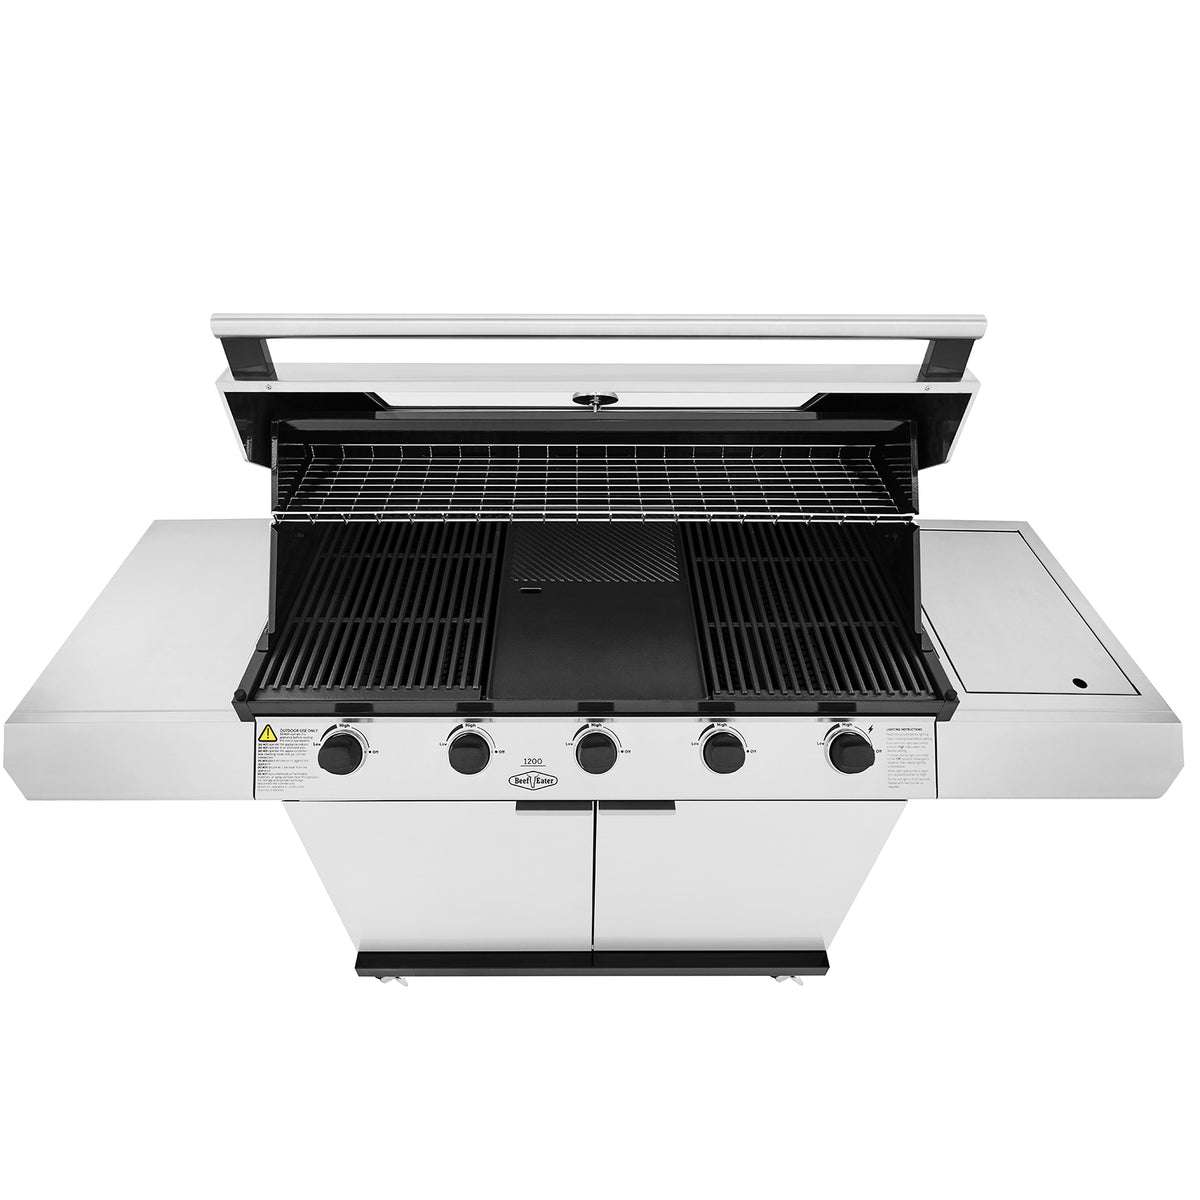 BeefEater 1200S Series 5 Burner Gas Barbecue with Cabinet Trolley and Side Burner